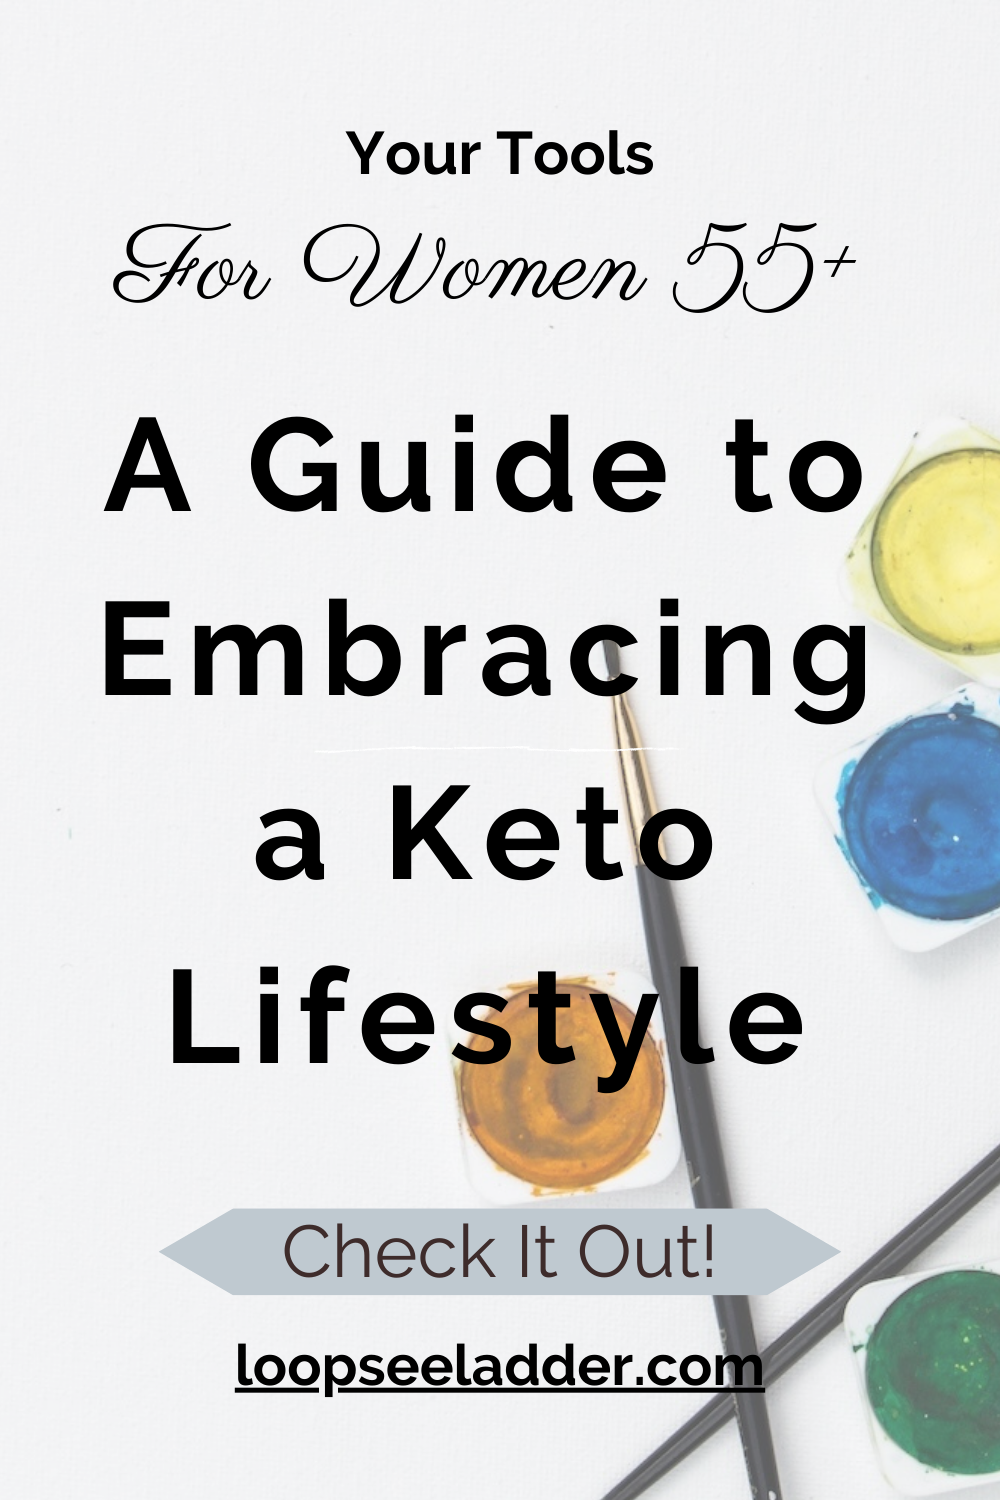 The Entertaining Guide to Embracing a Keto Lifestyle After 55